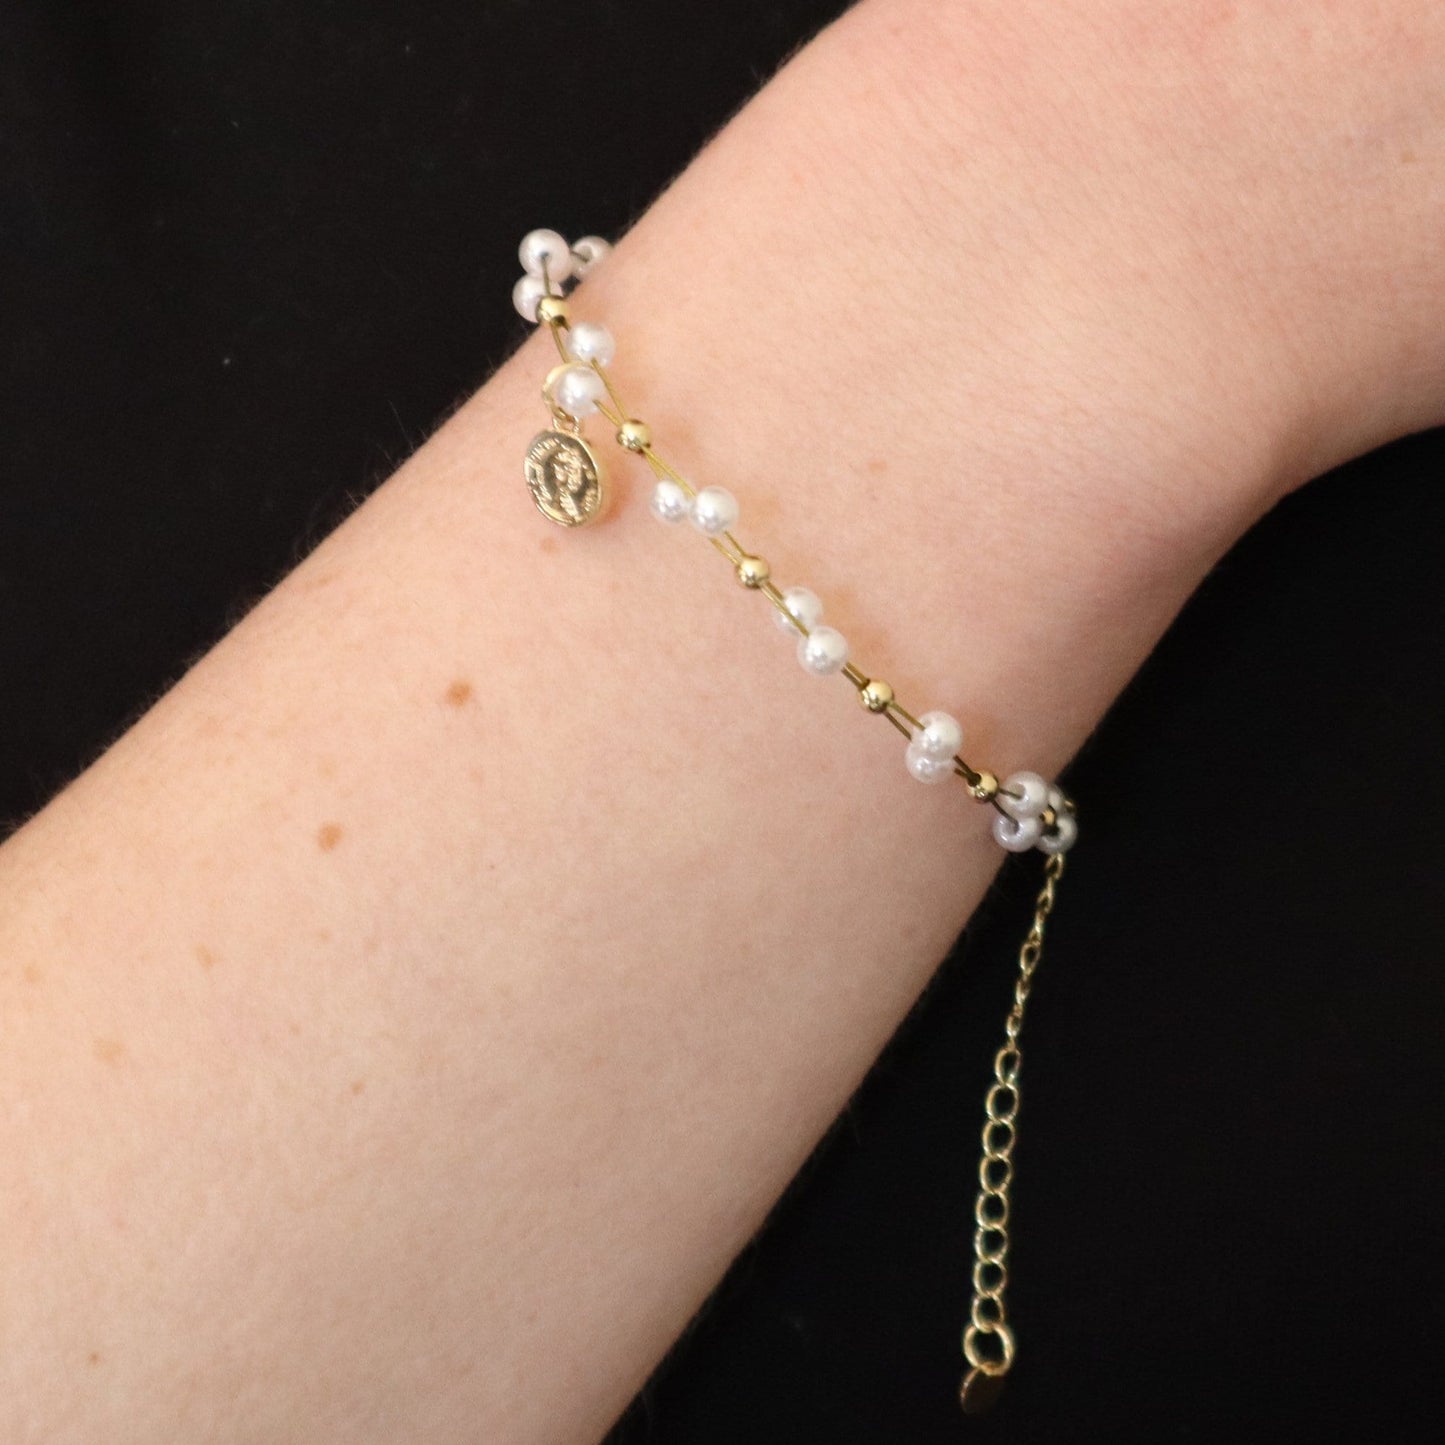 Gold plated pearl bracelet with charm , Pearl bracelet minimalist charm bracelet gift idea for best friend Same day shipping gift special